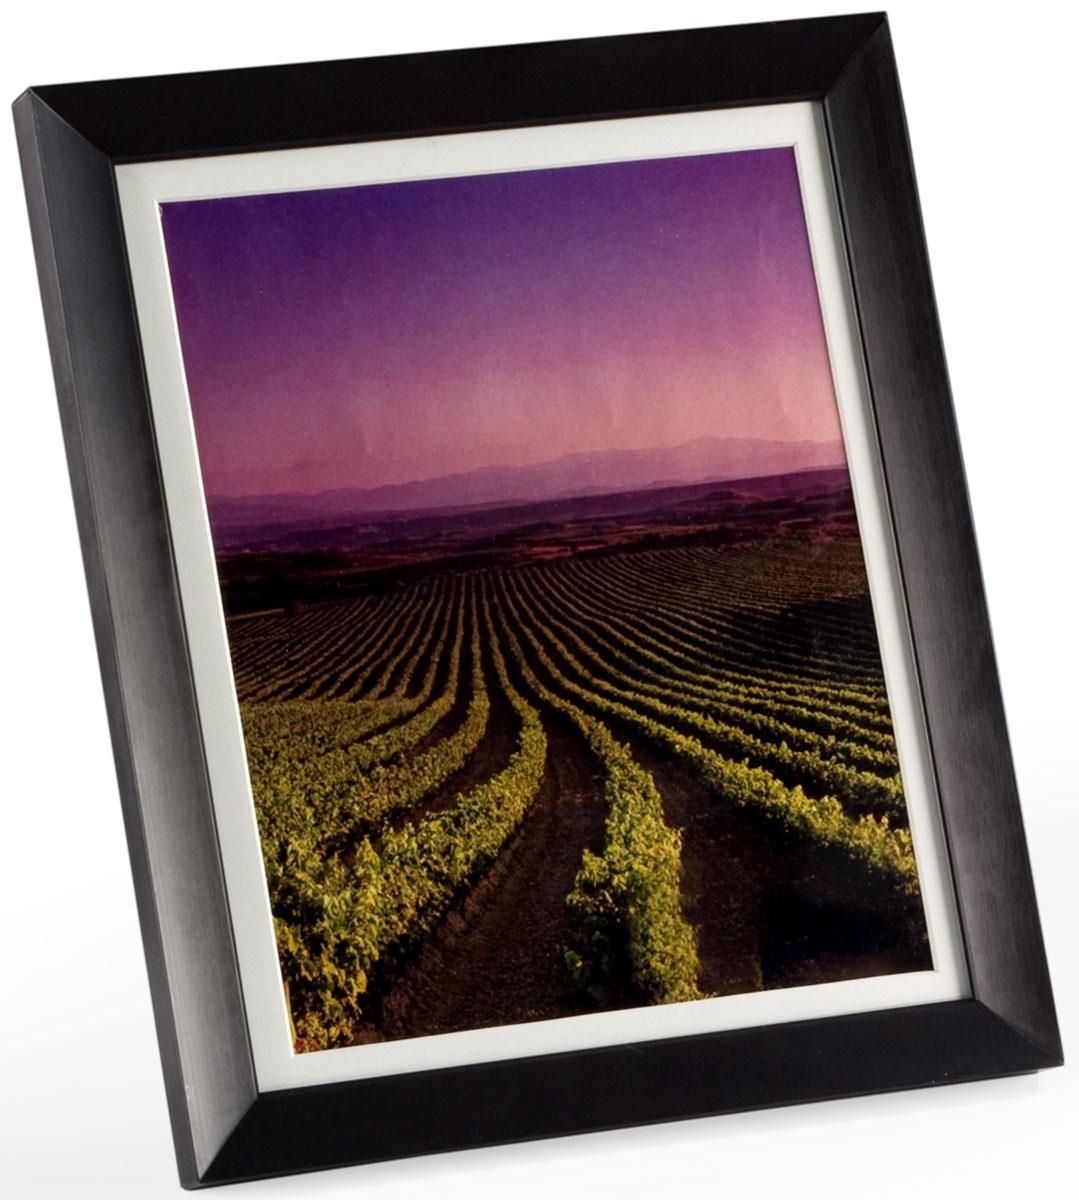 8" x 10" Matted Picture Frame | Portrait or Landscape Displaying